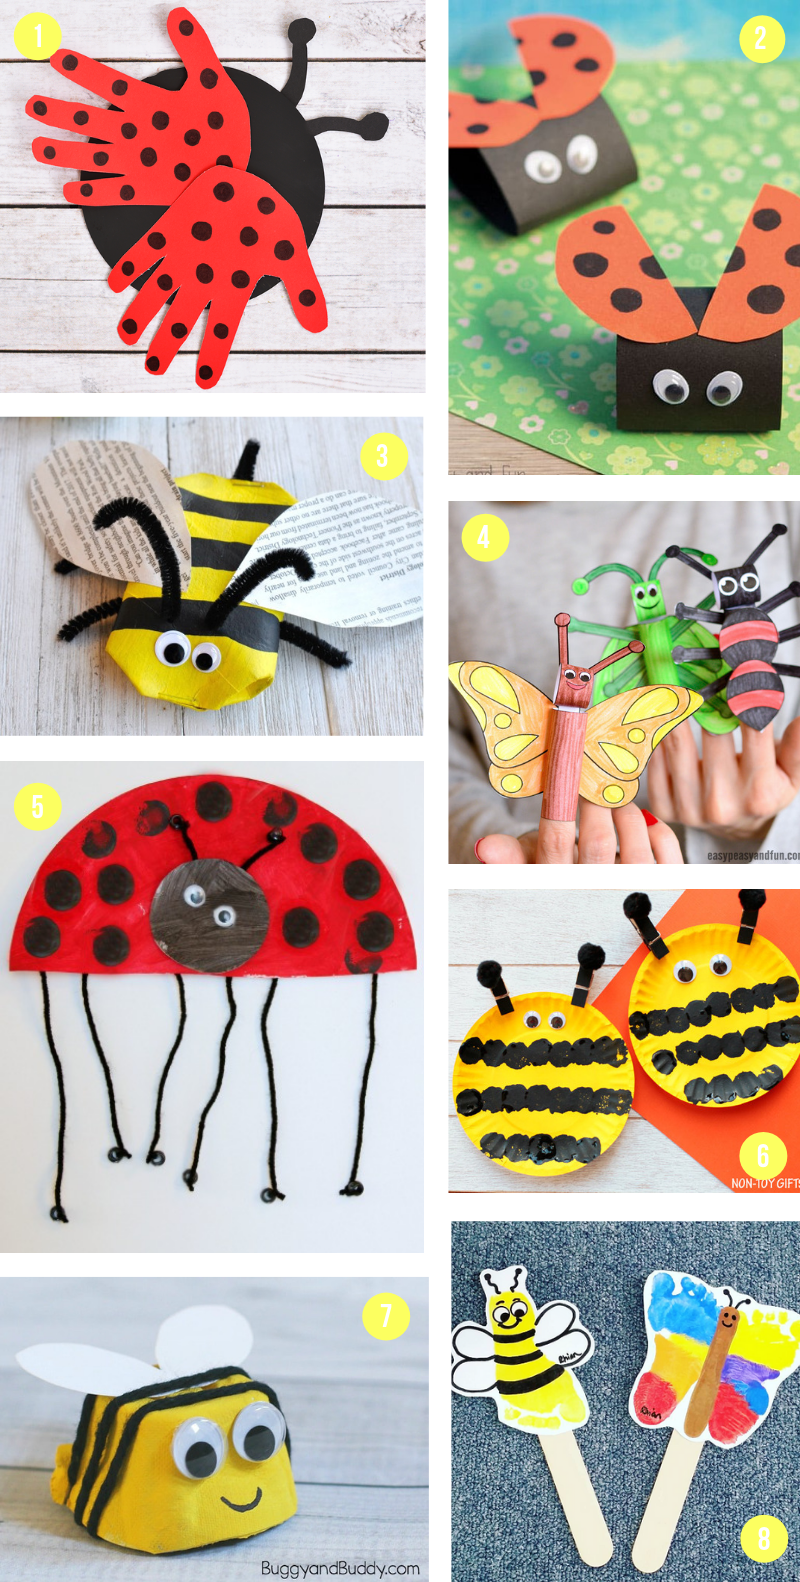 The Epic Collection Of Spring Crafts For Kids - All The Best Art Projects & Activities To Celebrate The Season -   16 diy projects school ideas